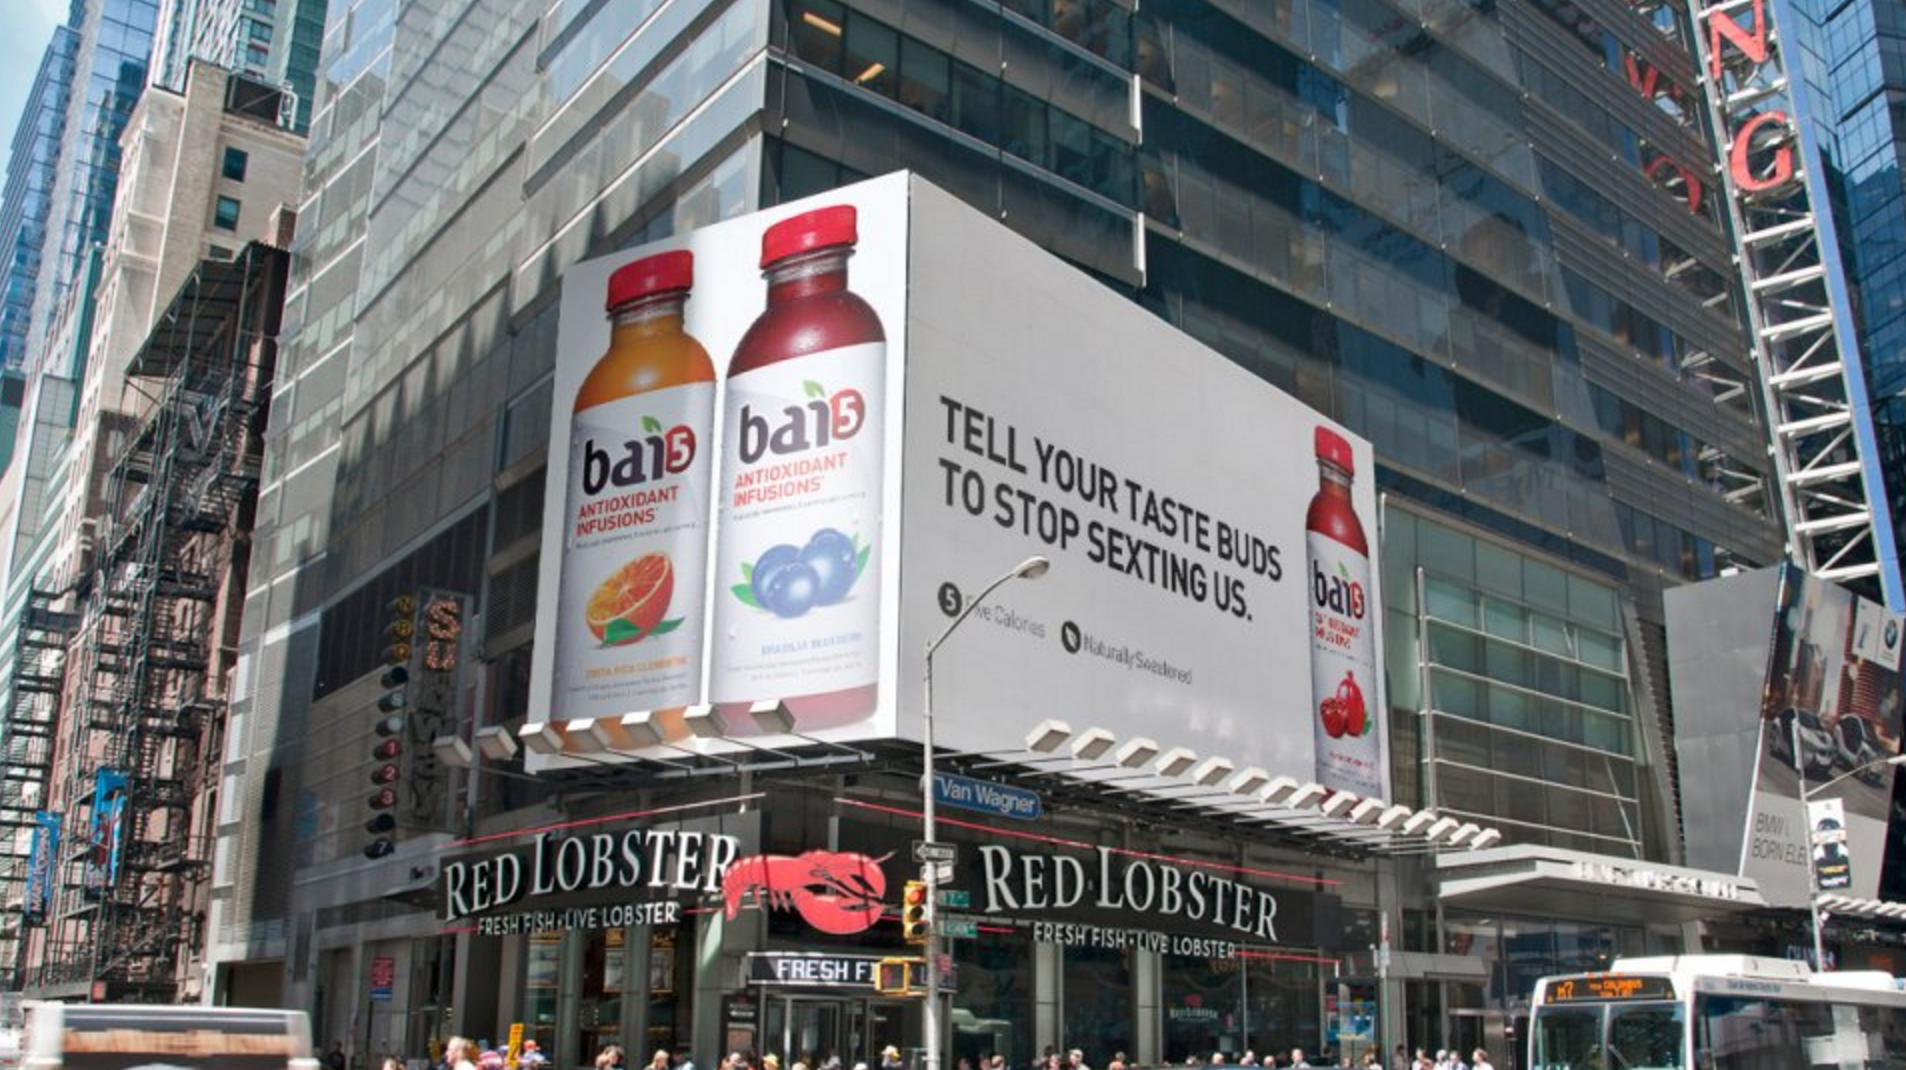 Times Square advertisement for bai5 drink